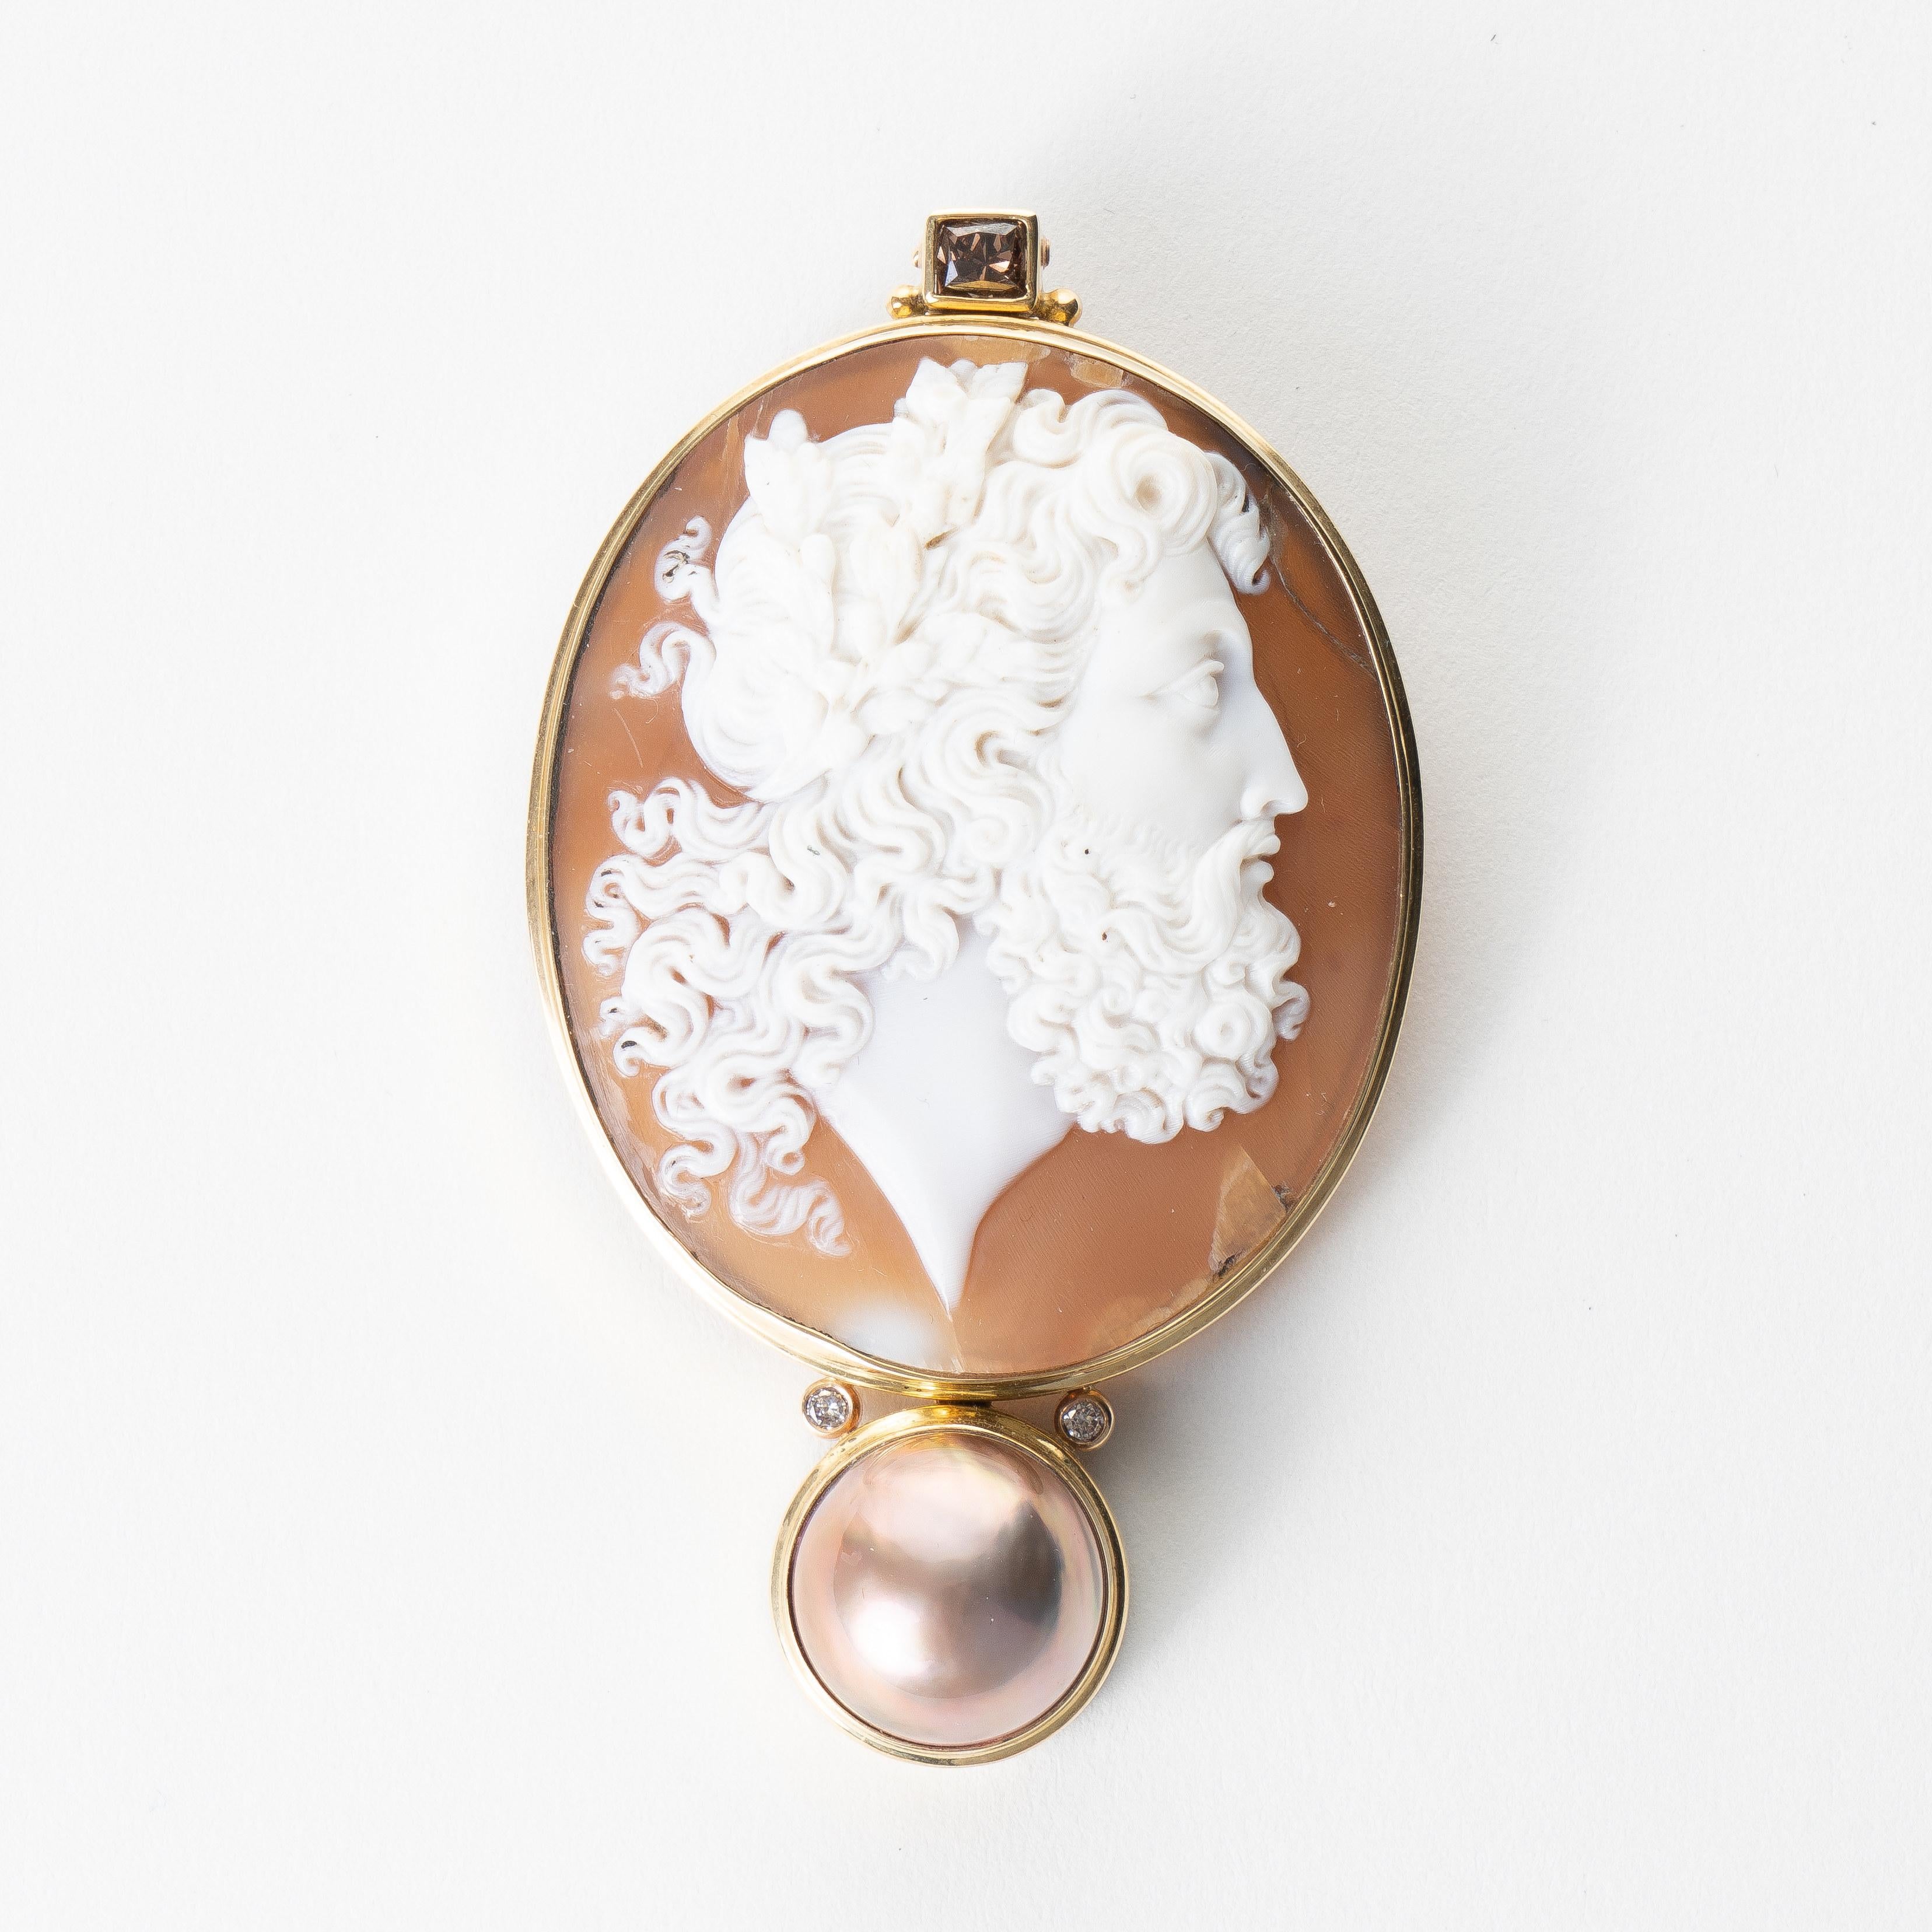 Exquisitely carved Italian oval shell cameo profile pendant of Zeus remounted in a custom 18K gold bezel with enhancements of a single mabé pearl flanked by a pair of white diamonds, and a square cut cognac diamond mounted above the cameo. 

The